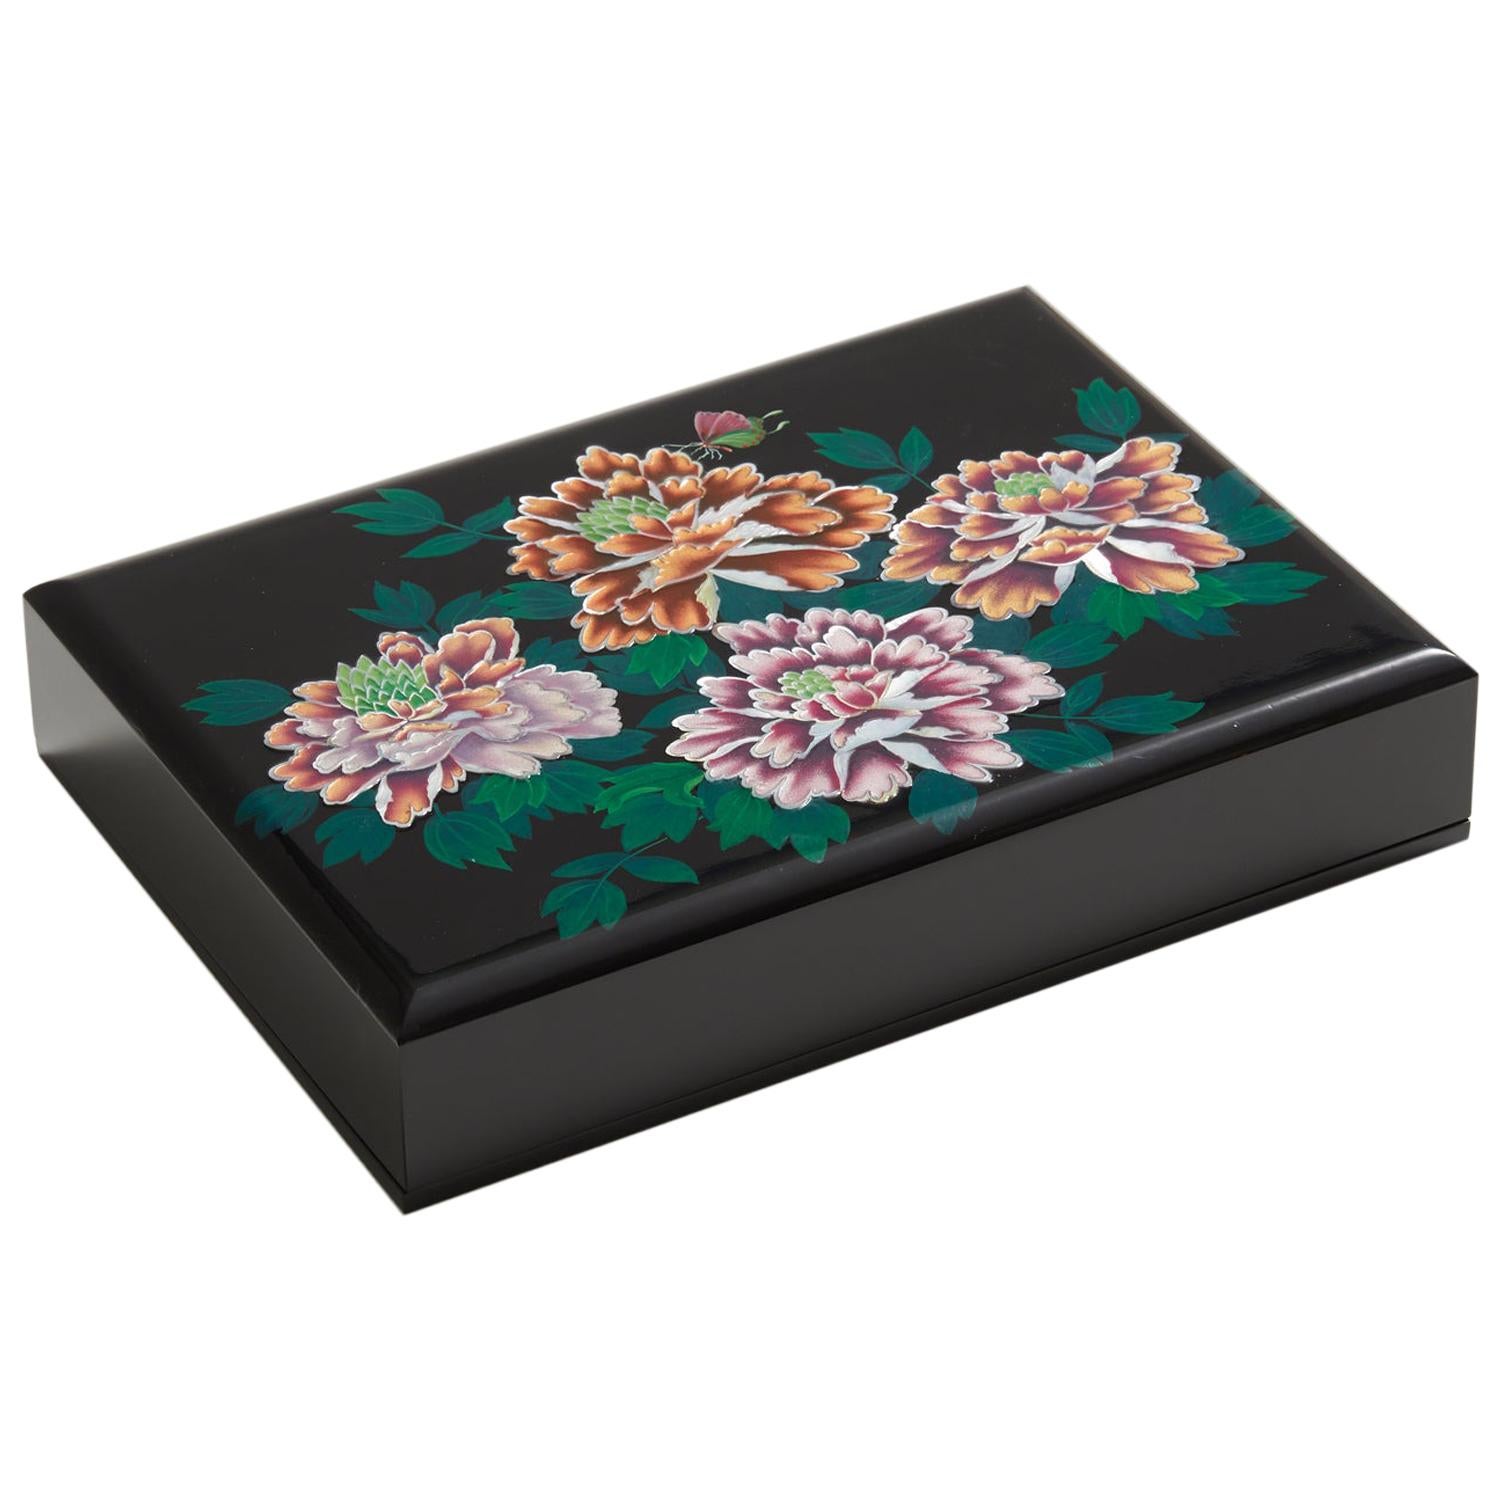 Floral Design Mother of Pearl Box with Peony Blossoms by Arijian 